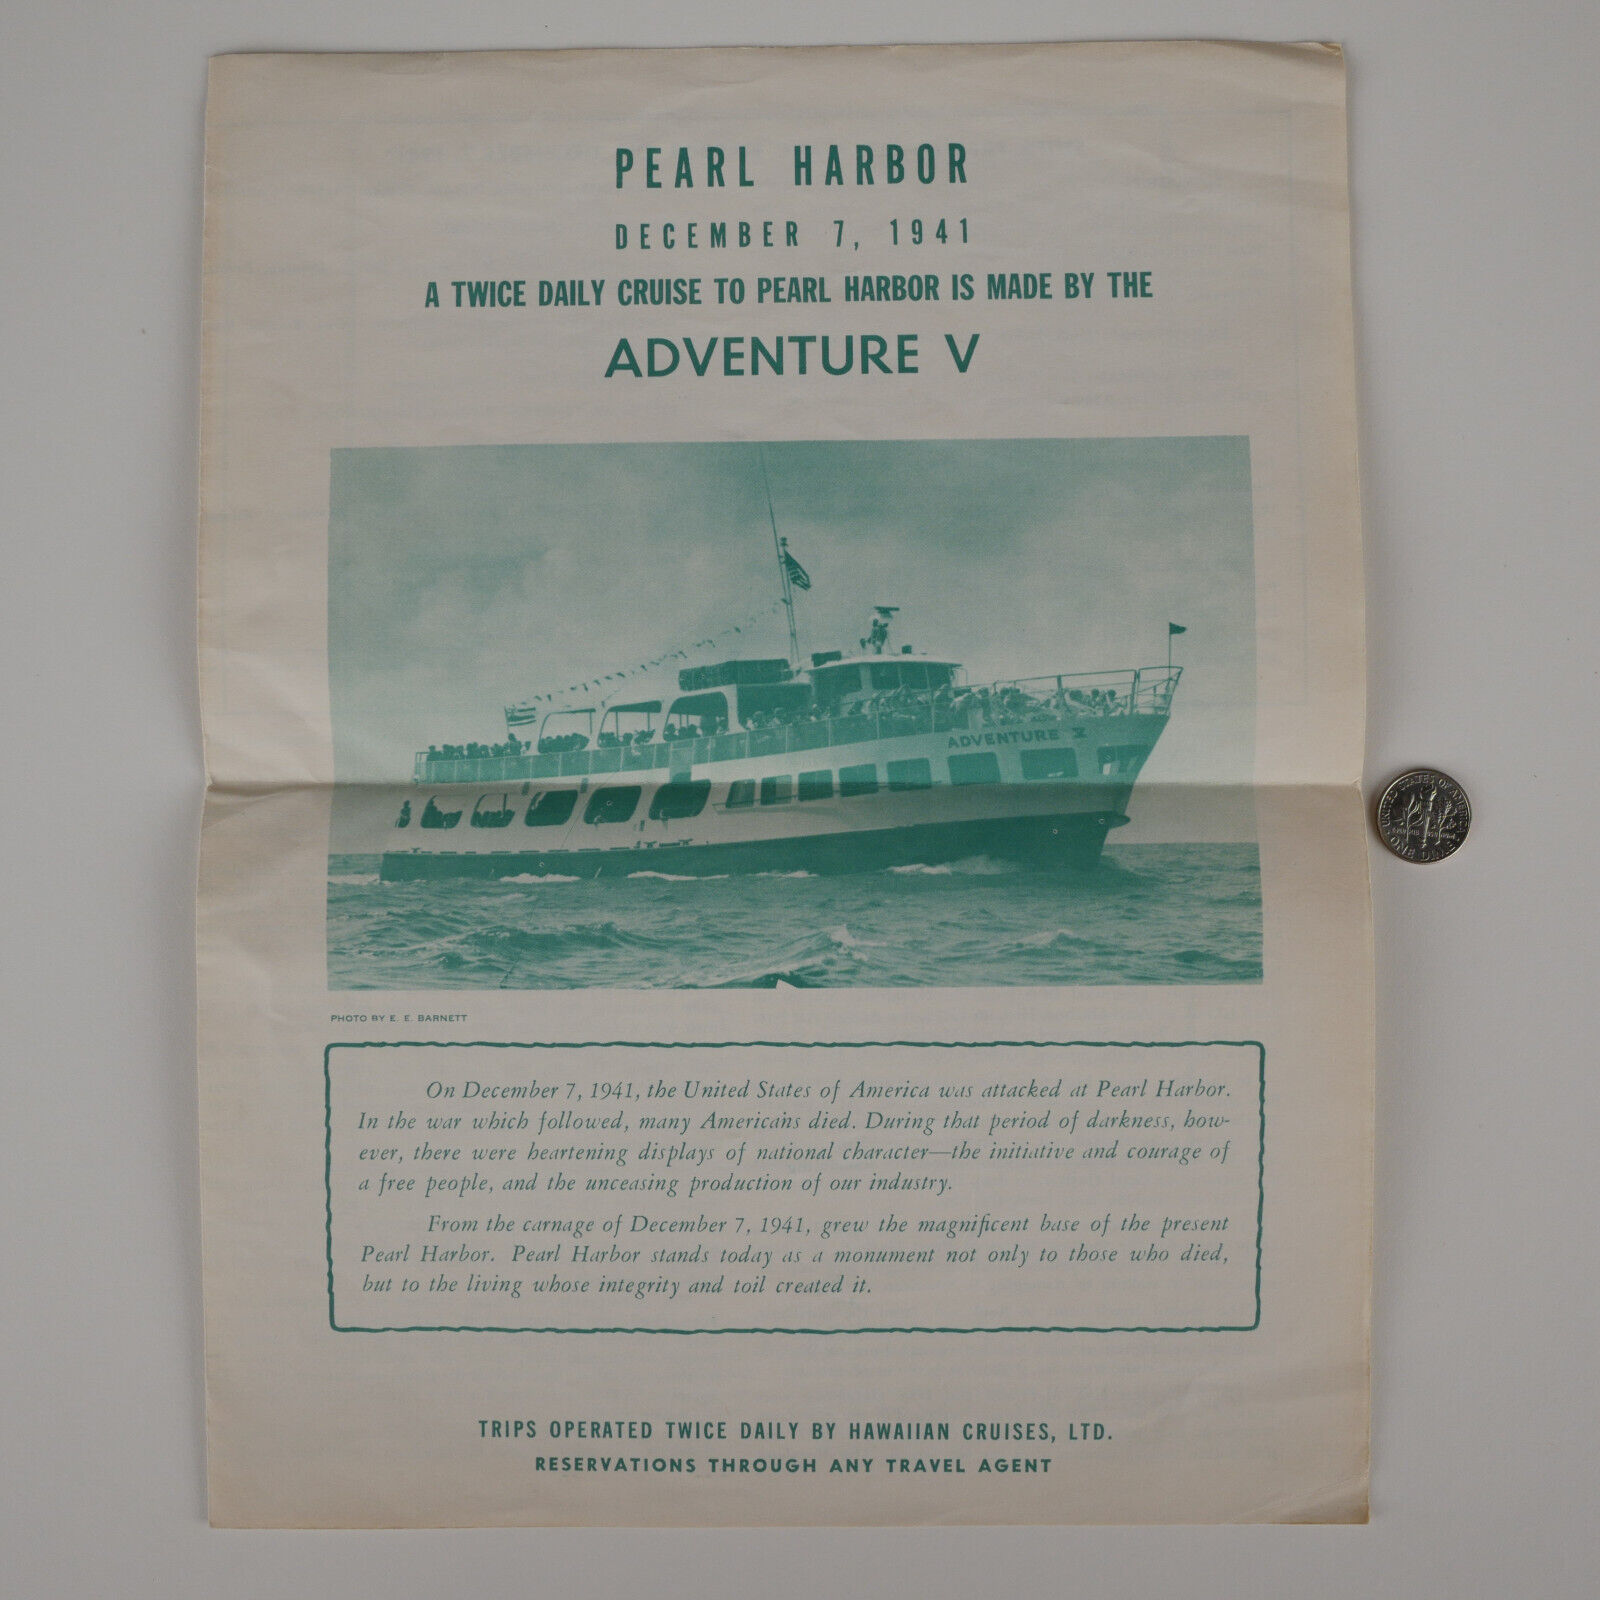 1978 Pearl Harbor Cruise Flyer for the Adventure V